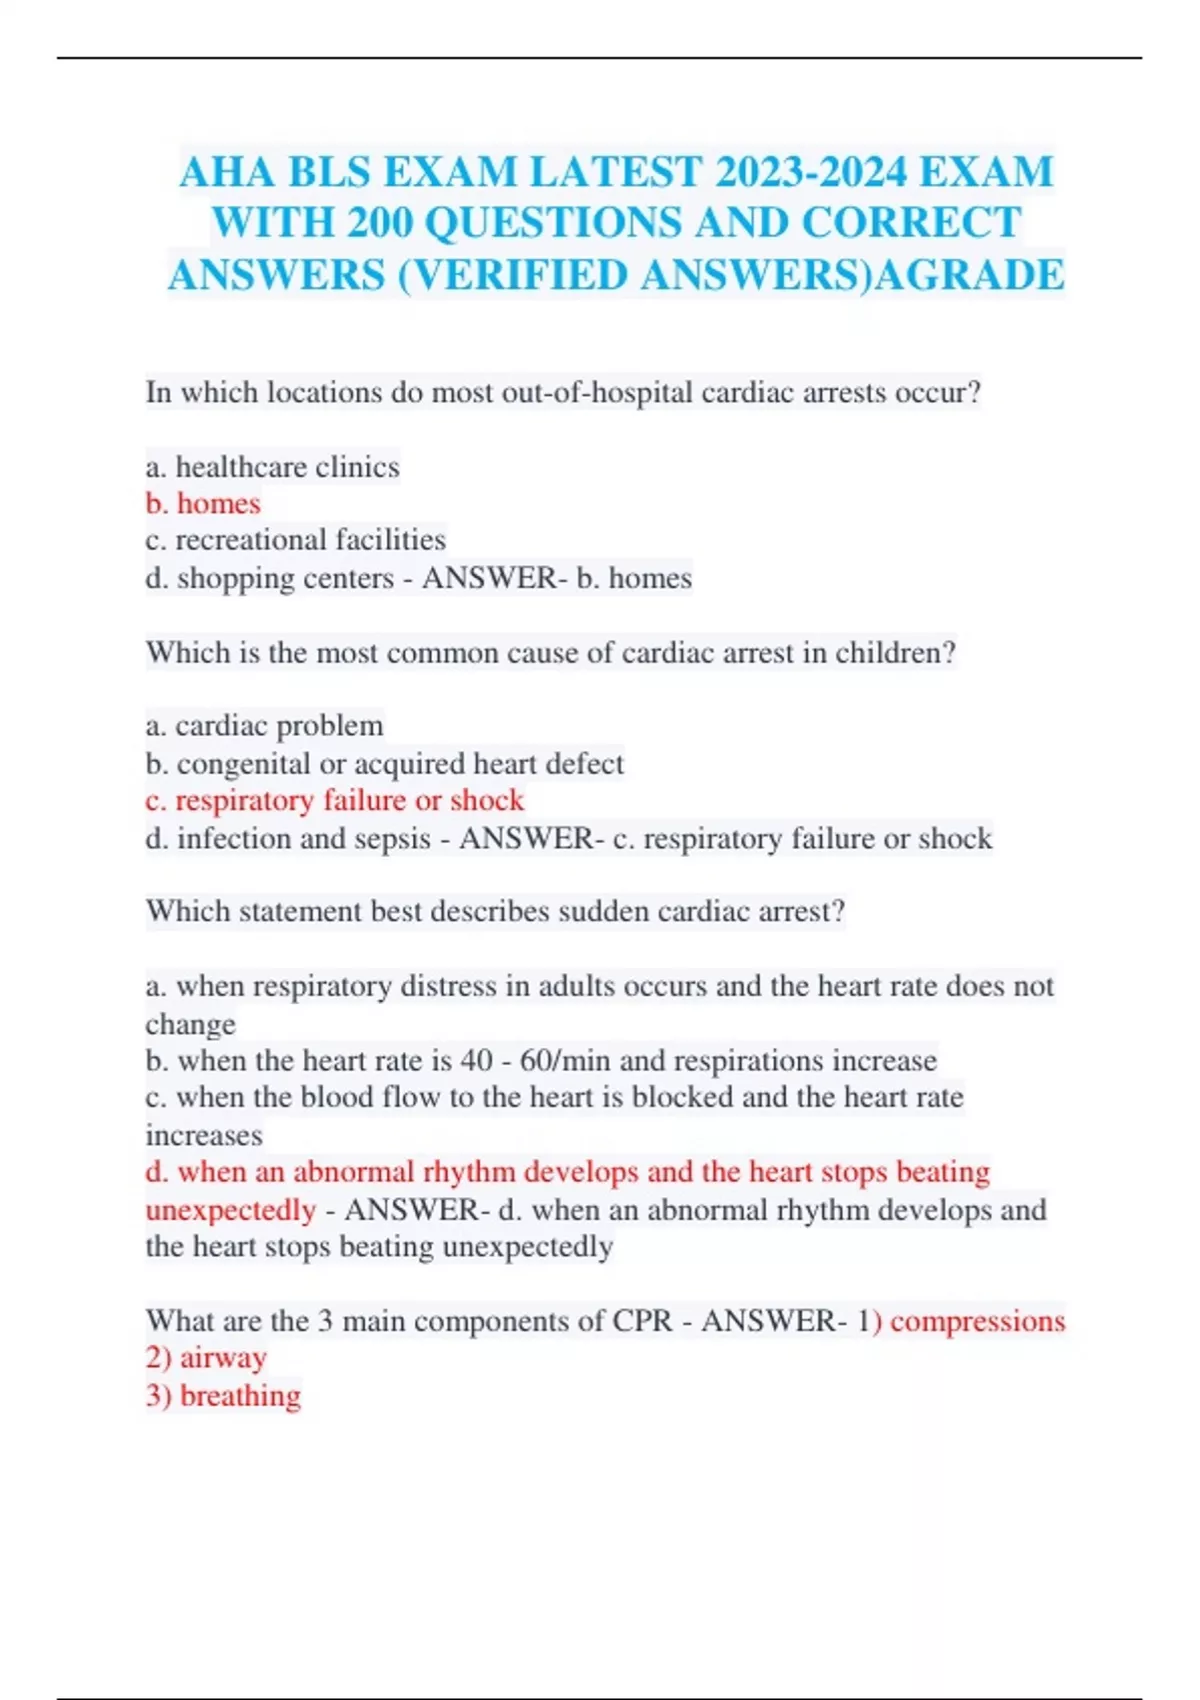 AHA BLS EXAM LATEST 20232024 EXAM WITH 200 QUESTIONS AND CORRECT